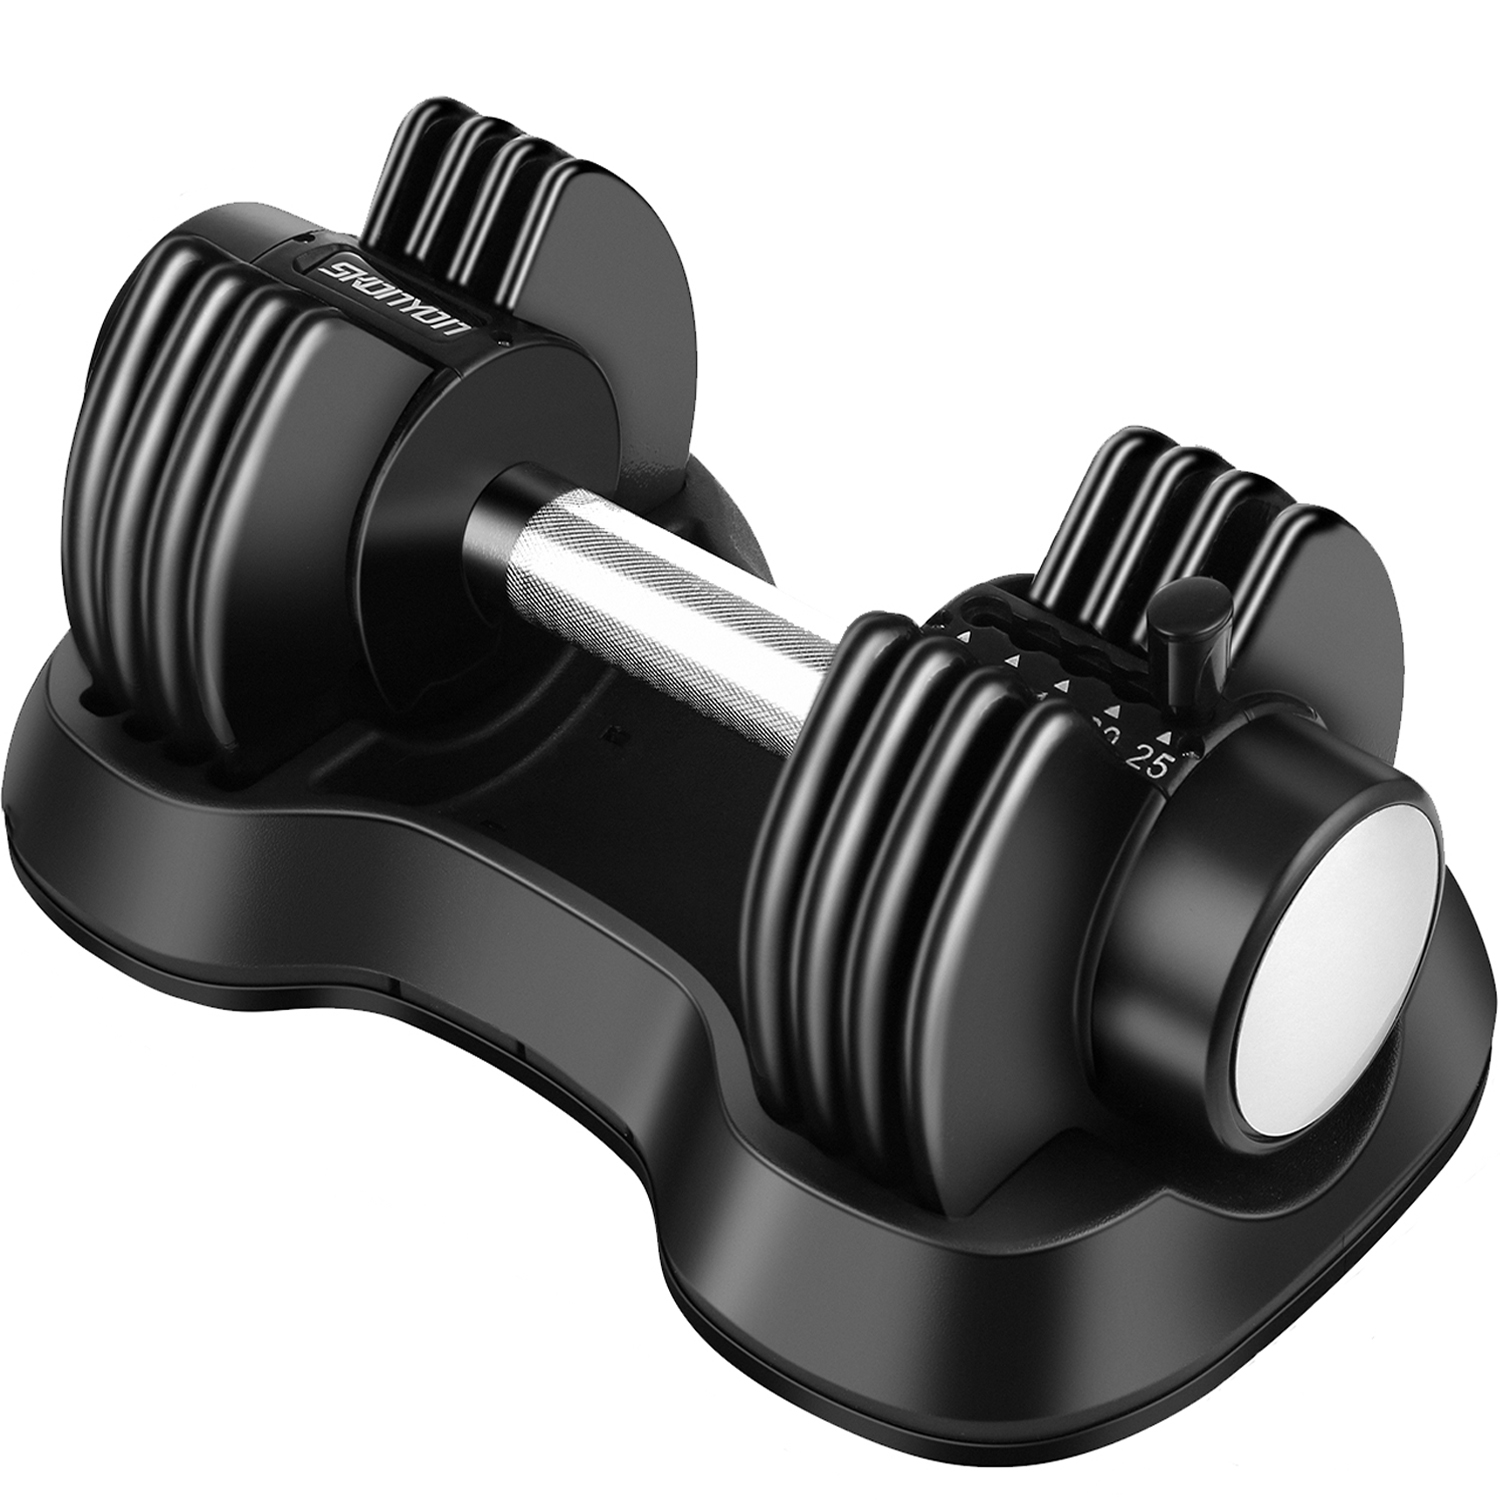 Adjustable Dumbbell Barbell 25 lbs Weight with Handle and Weight Plate for Gym and Home, Black, Single - image 1 of 8